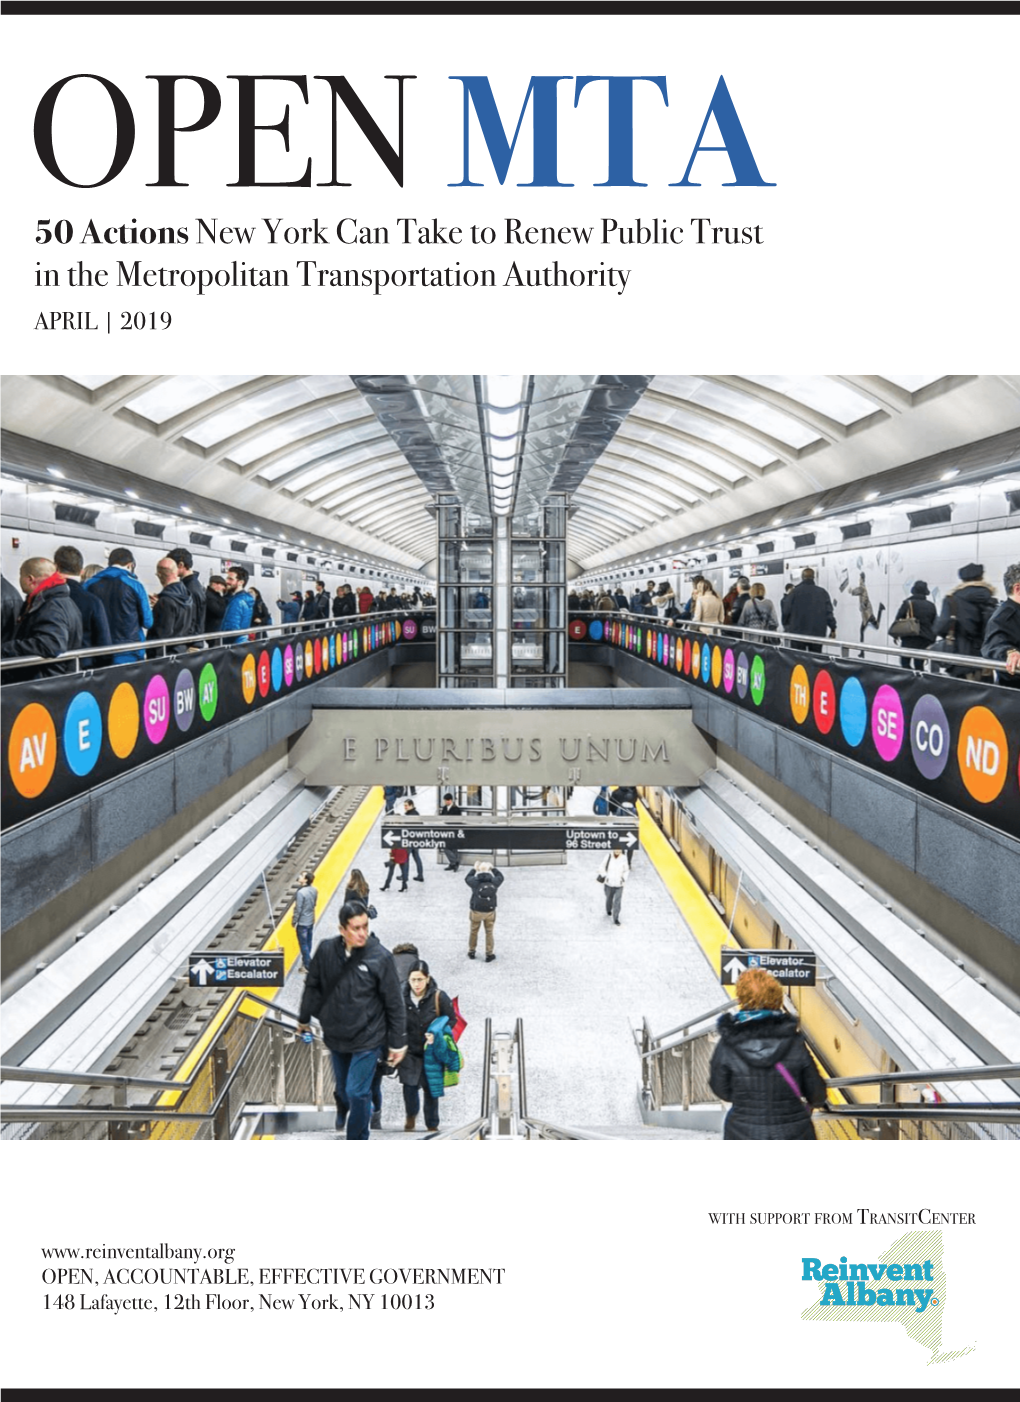 50 Actionsnew York Can Take to Renew Public Trust in The